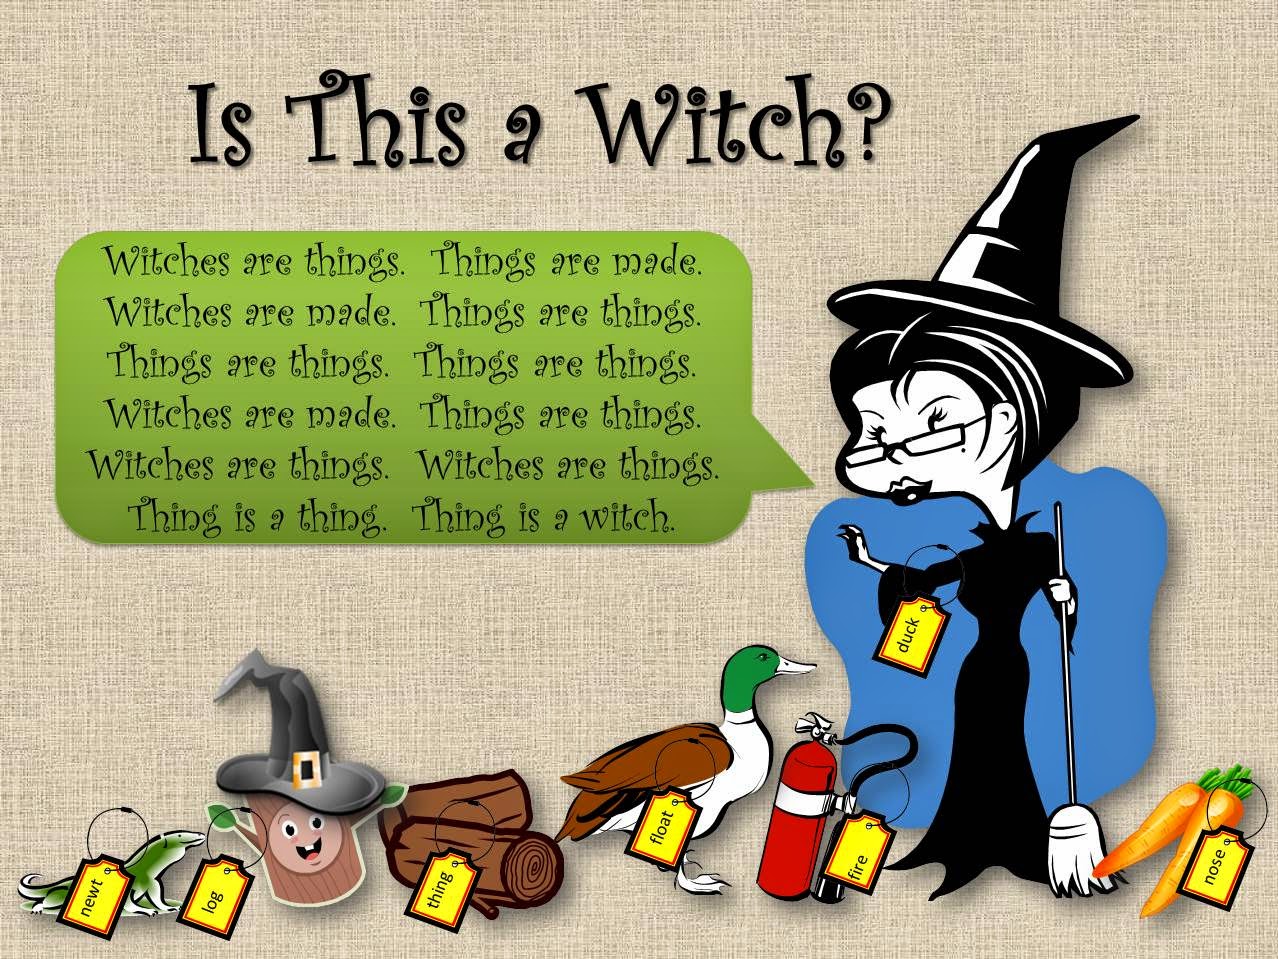 A newt, a log as a witch, a log, a duck, a witch, a carrot, and a fire extinguisher, all labeled, some incorrectly.